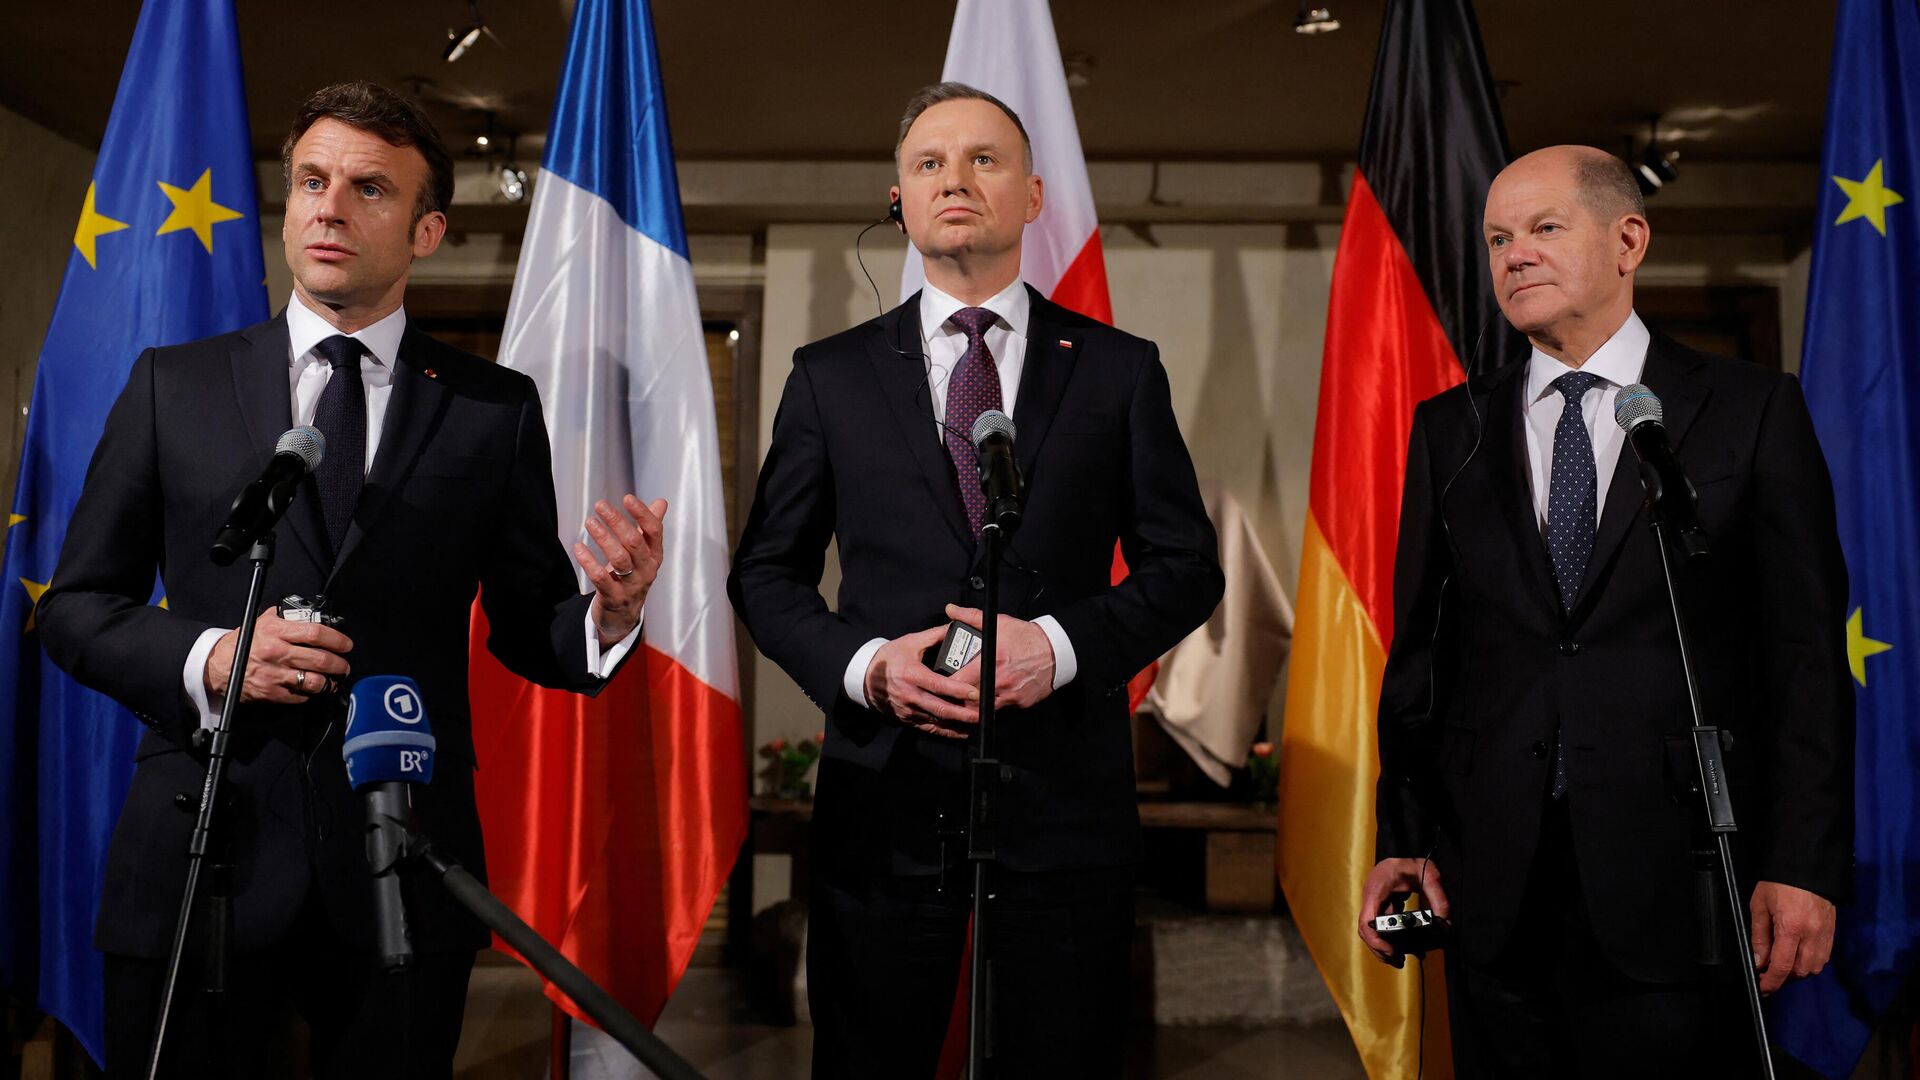 French President Emmanuel Macron (L), Poland's President Andrzej Duda (C) and German Chancellor Olaf Scholz (R) make a statement after their meeting during the Munich Security Conference (MSC) in Munich, southern Germany, on February 17, 2023. (Photo by Odd ANDERSEN / AFP) - Sputnik International, 1920, 20.02.2023